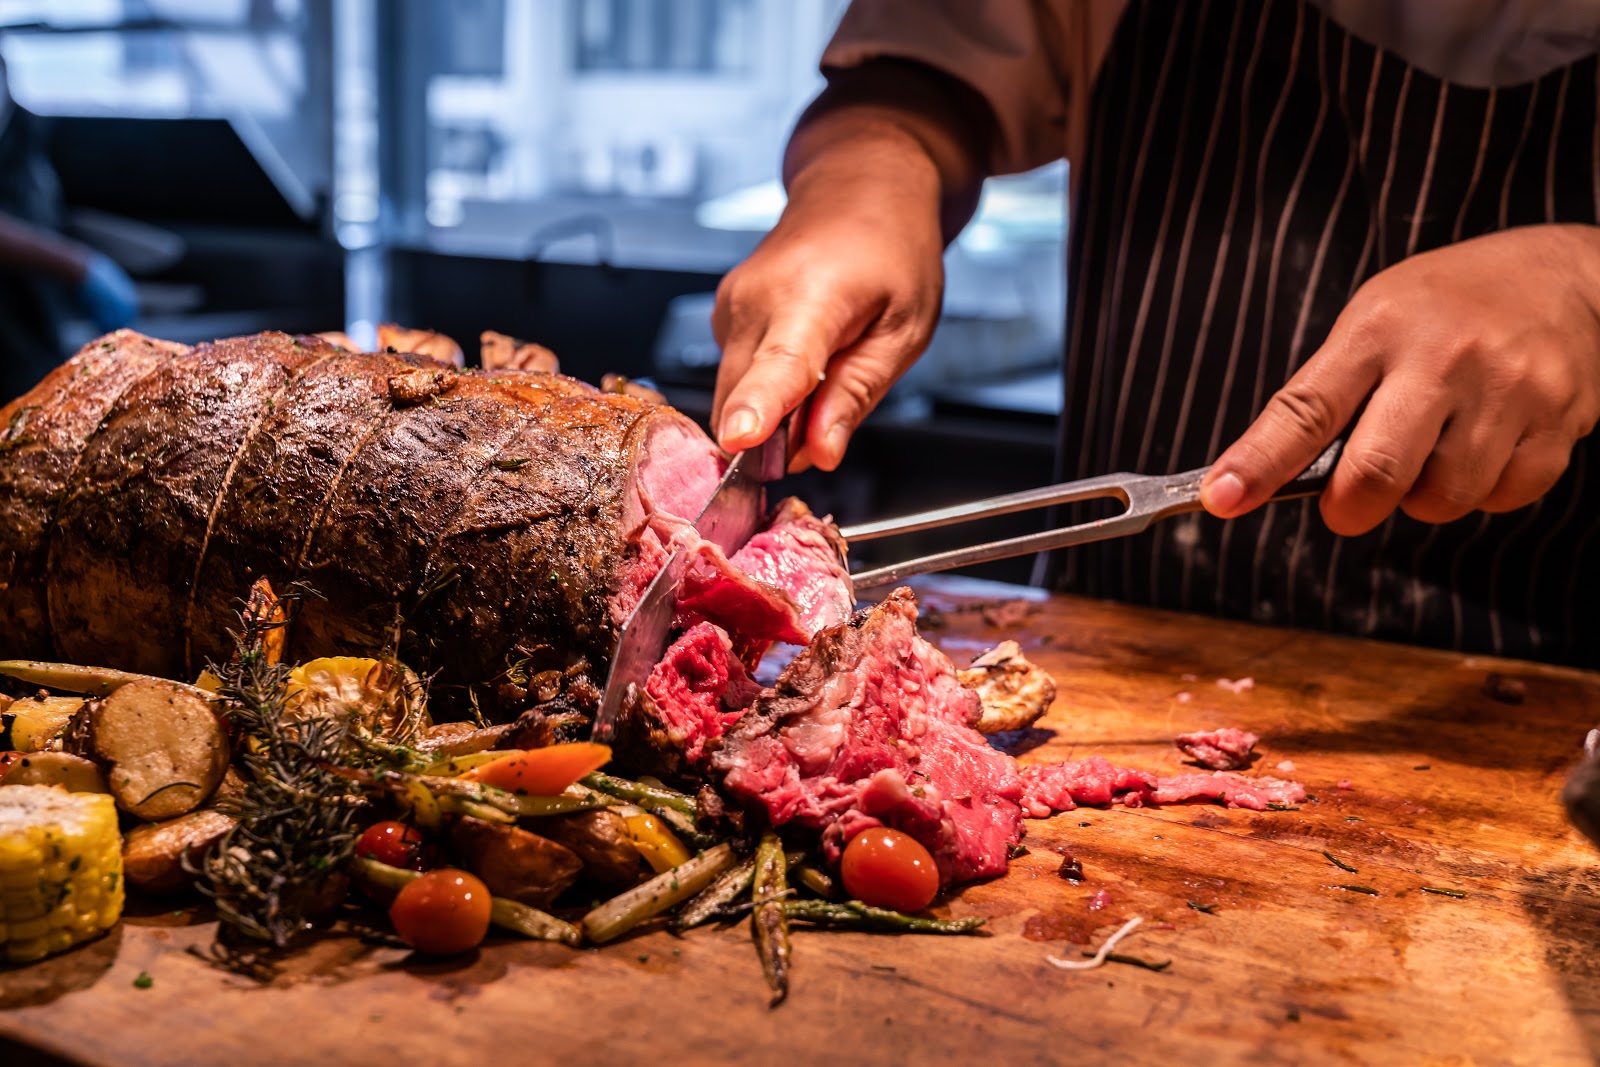 Christmas party food ideas: A home chef carves a prime rib